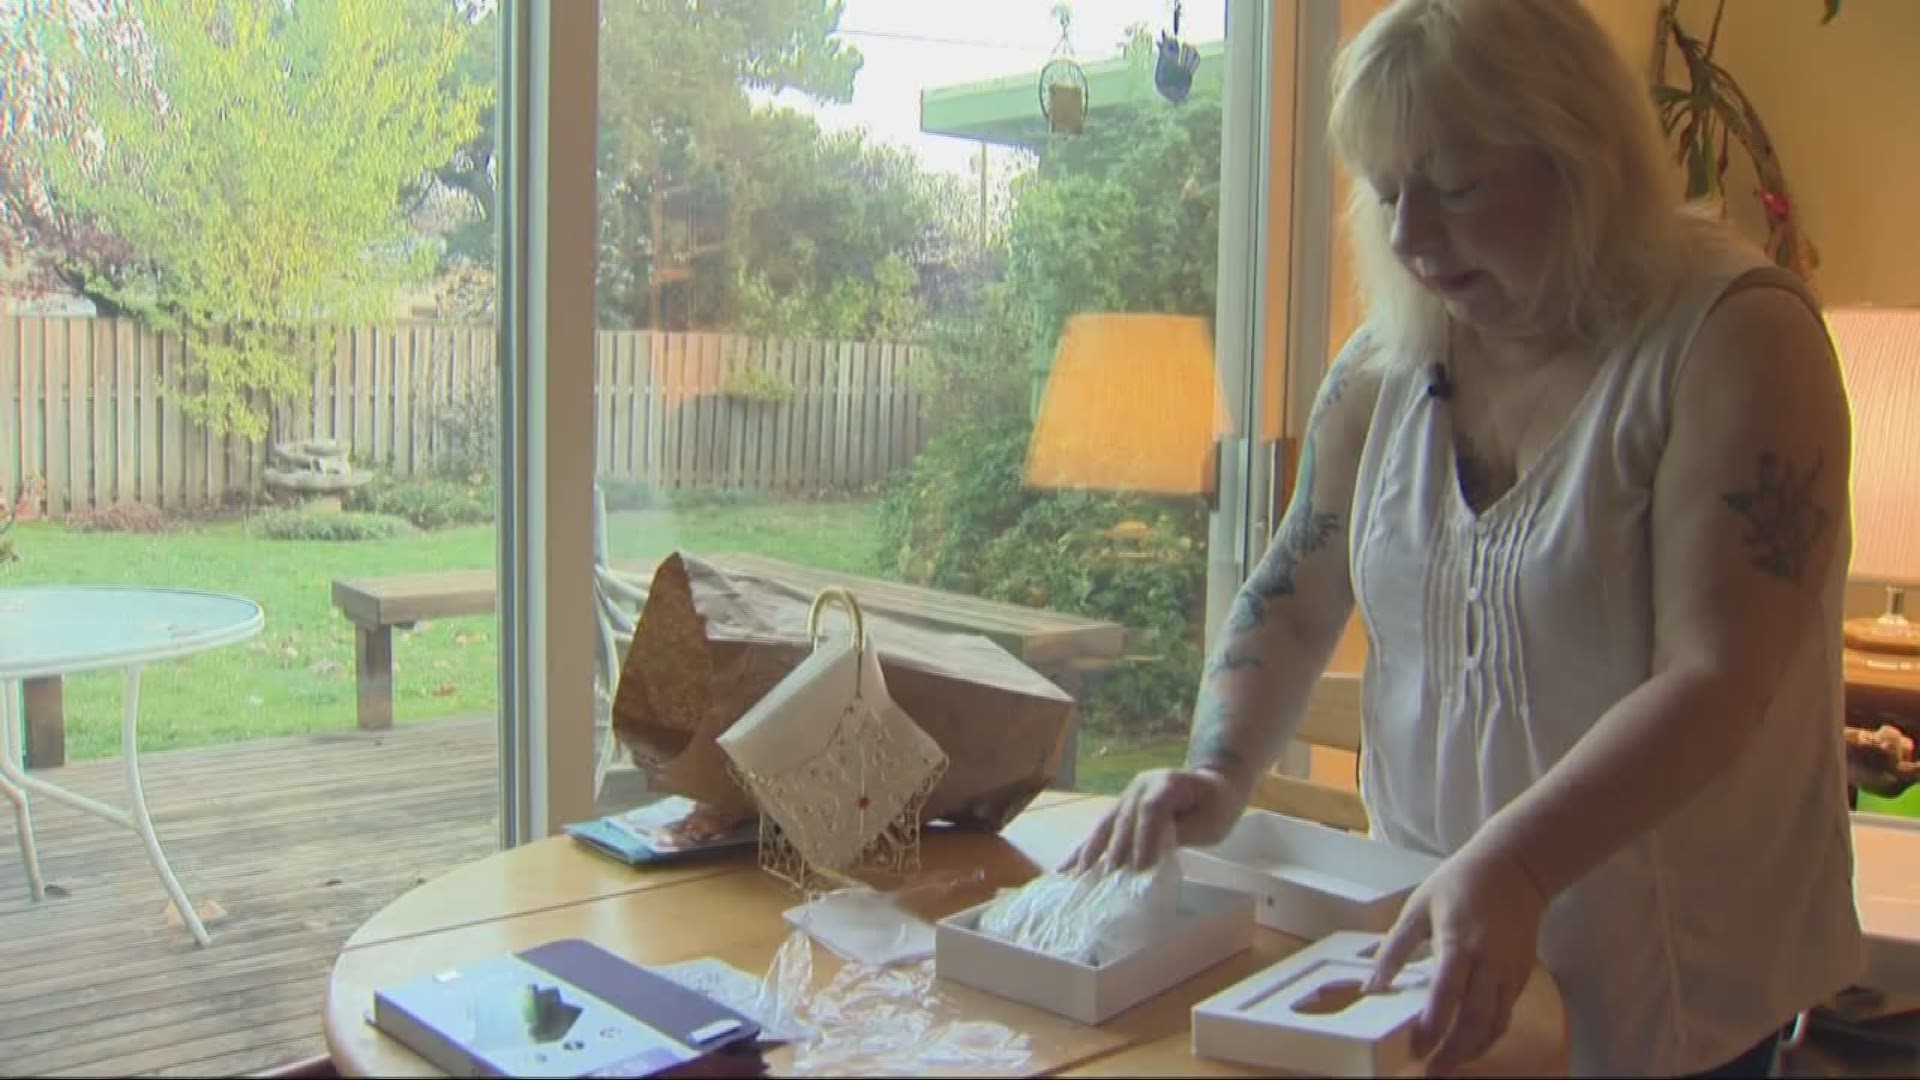 Woman finds bag of flour in iPad box